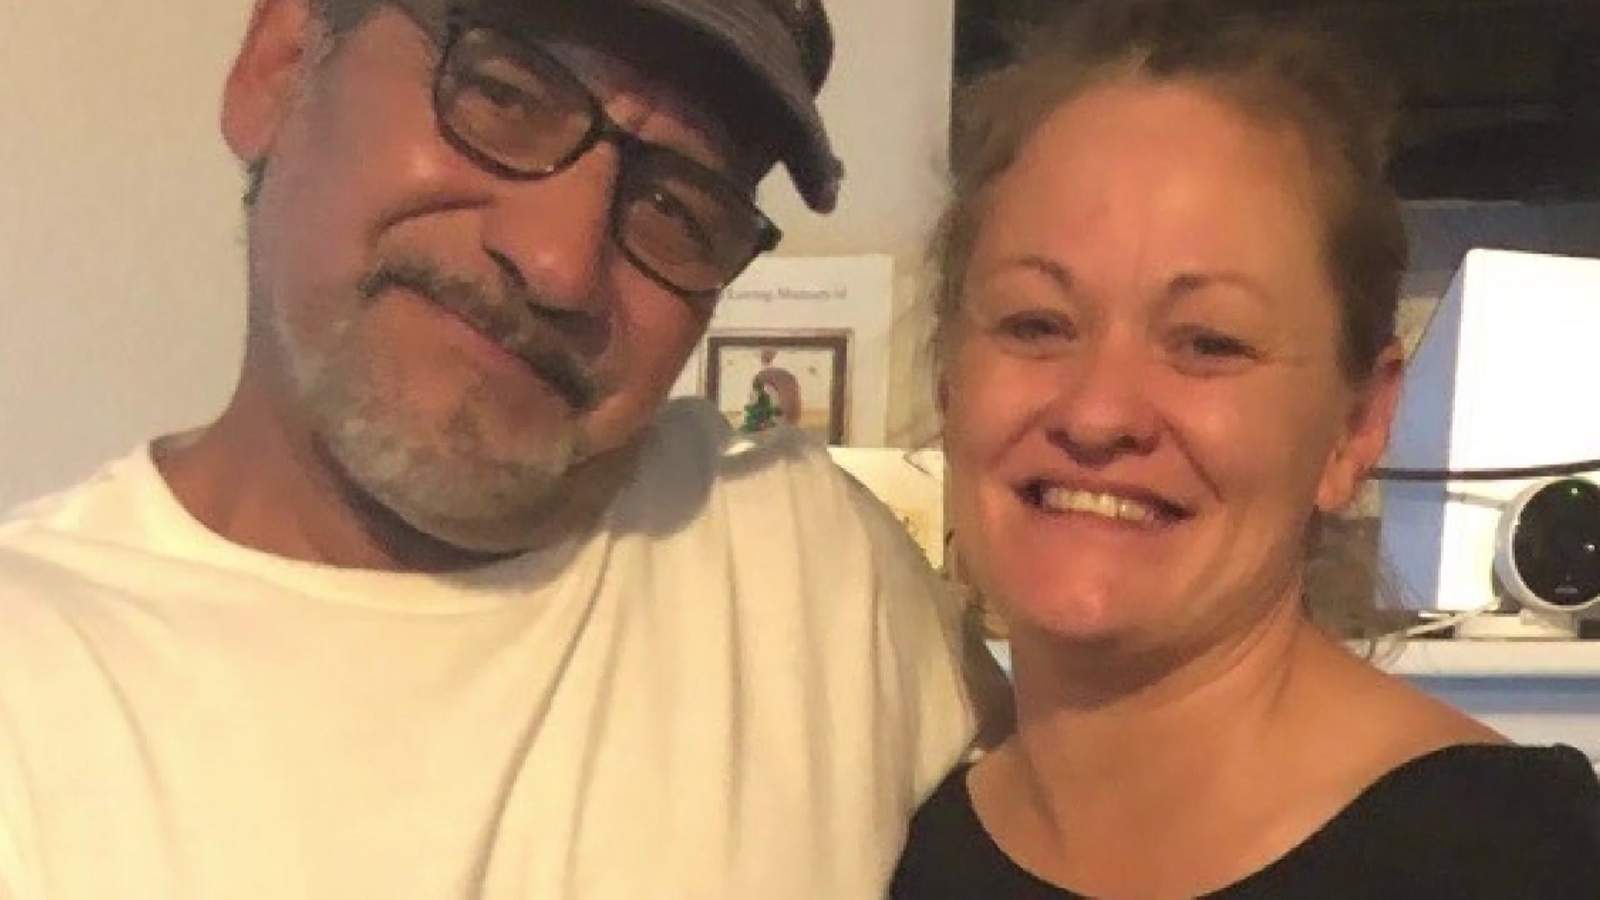 ‘He deserves justice’: Fiancee of man killed in possible road-rage shooting asks for public’s help to find his killer